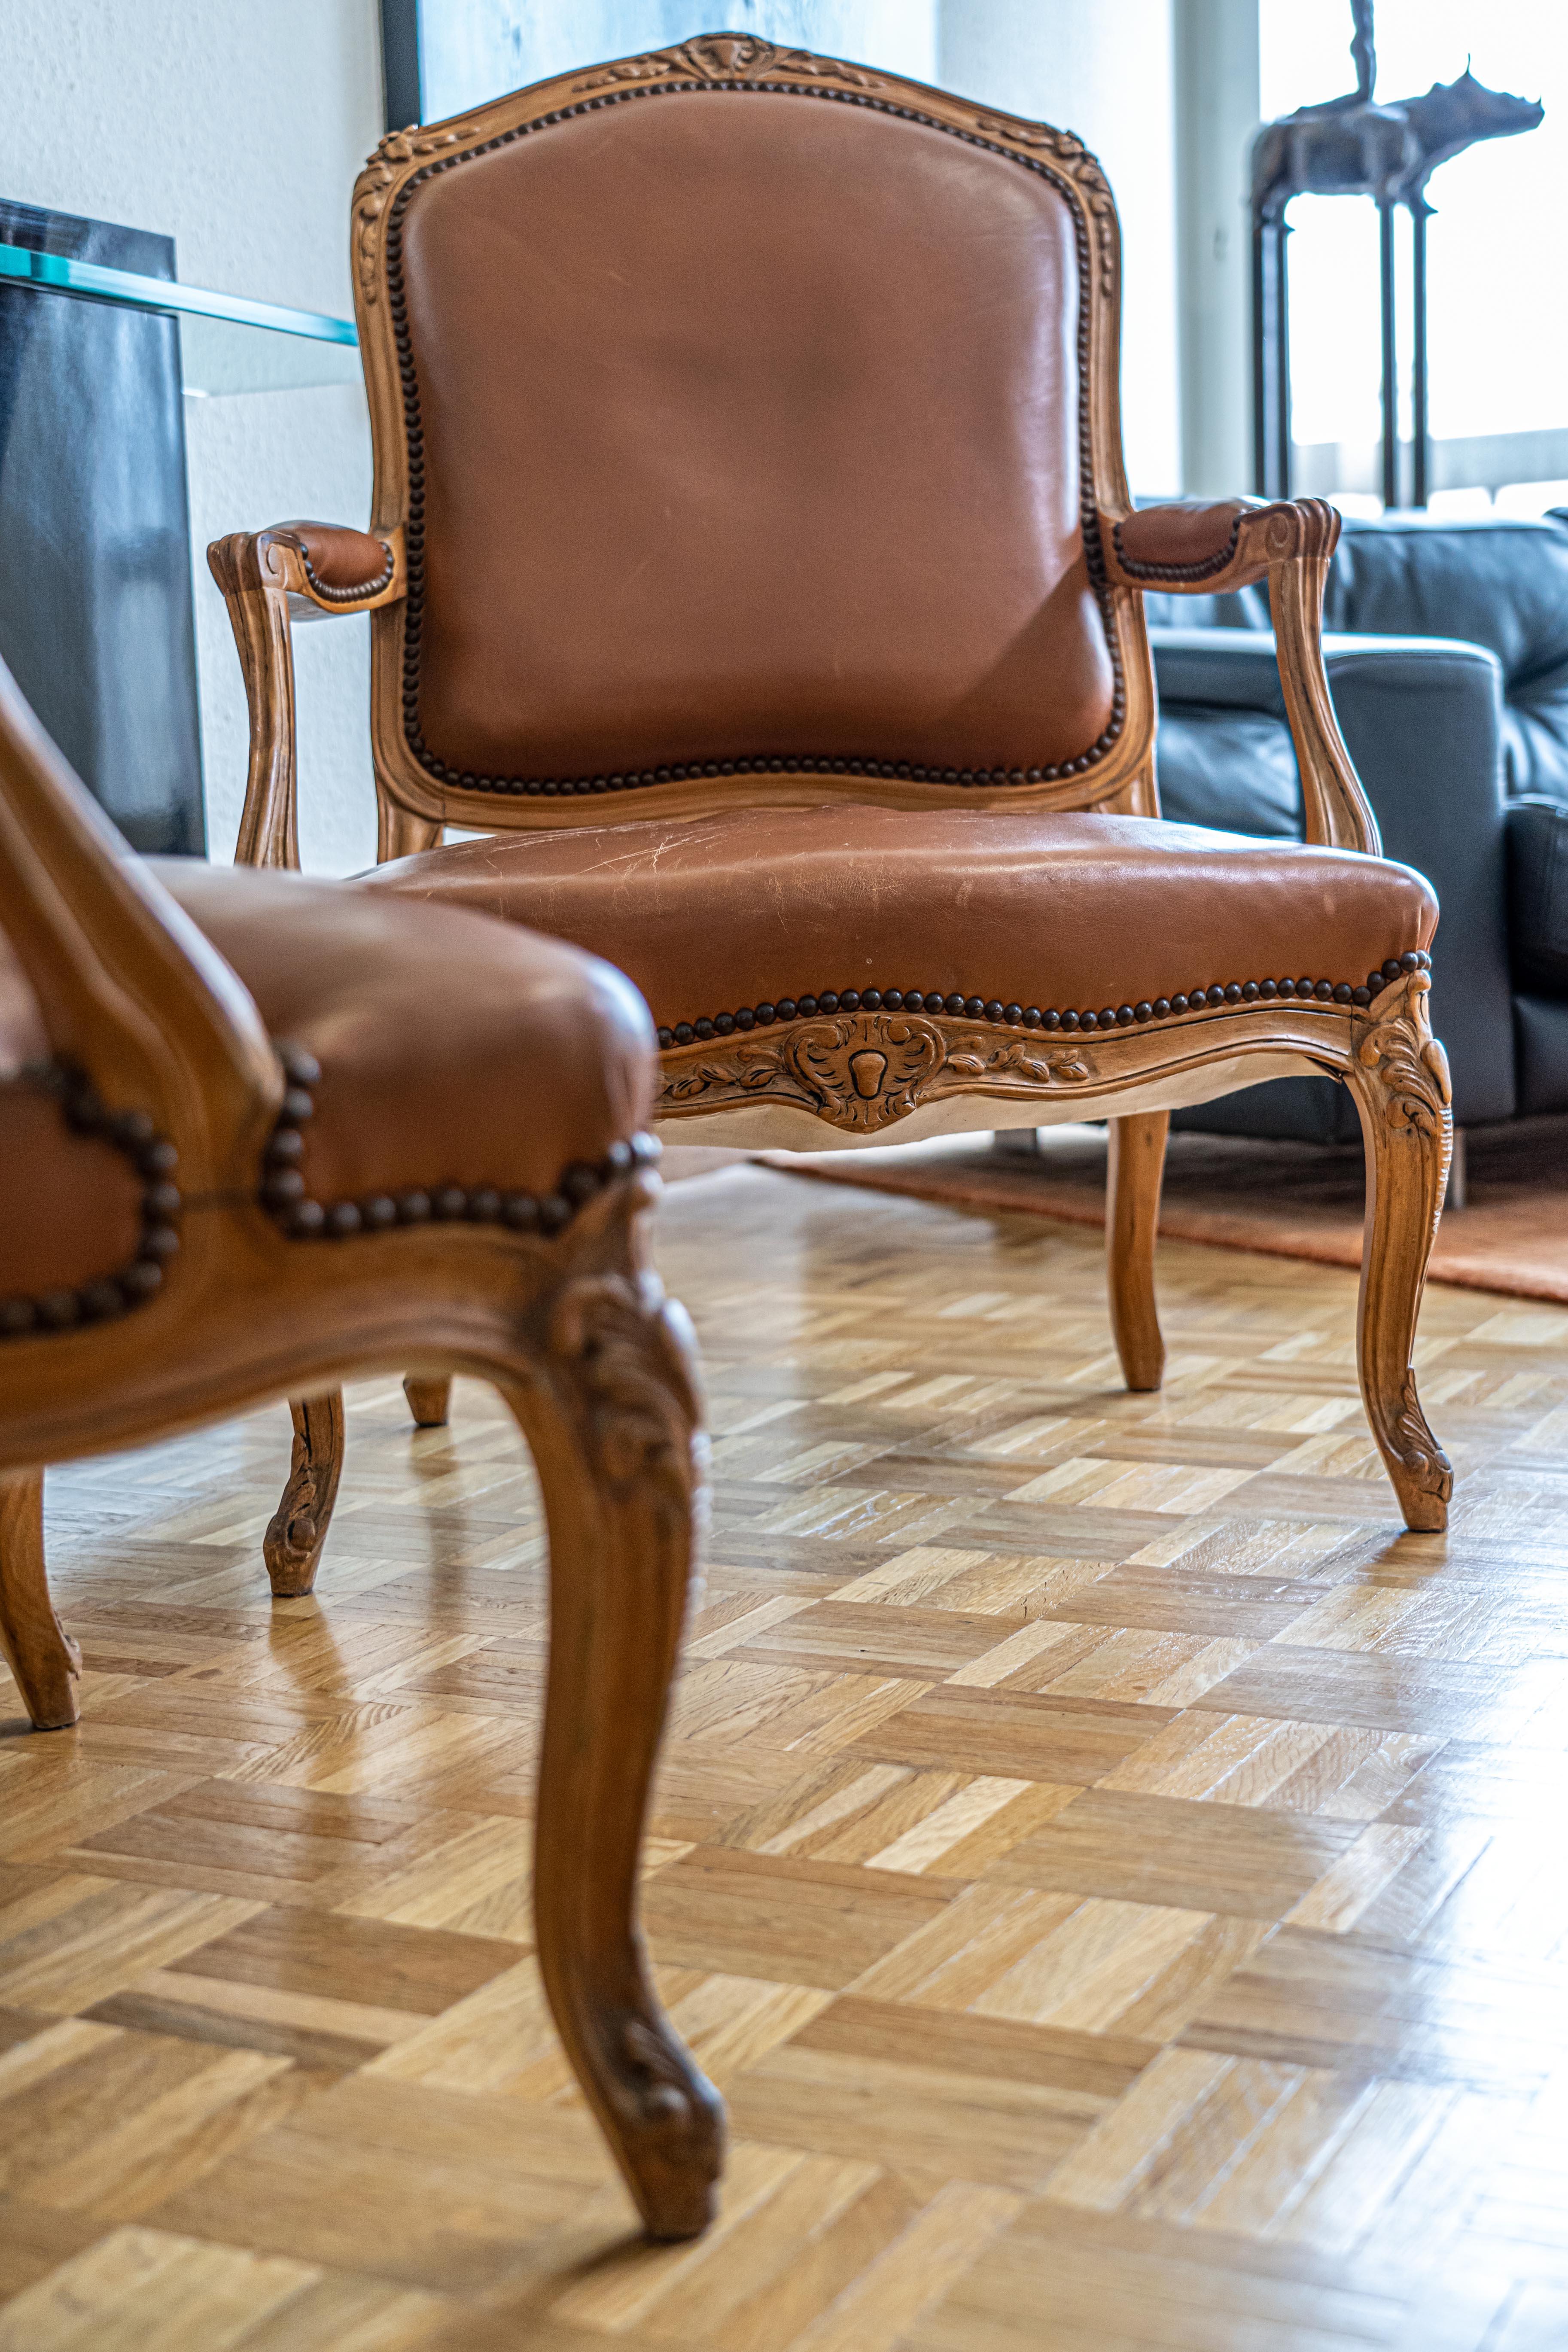 Pair of armchairs in the Louis XV style from the end of the 19th century made of oakwood in perfect condition and upholstered in a camel color leather.
  